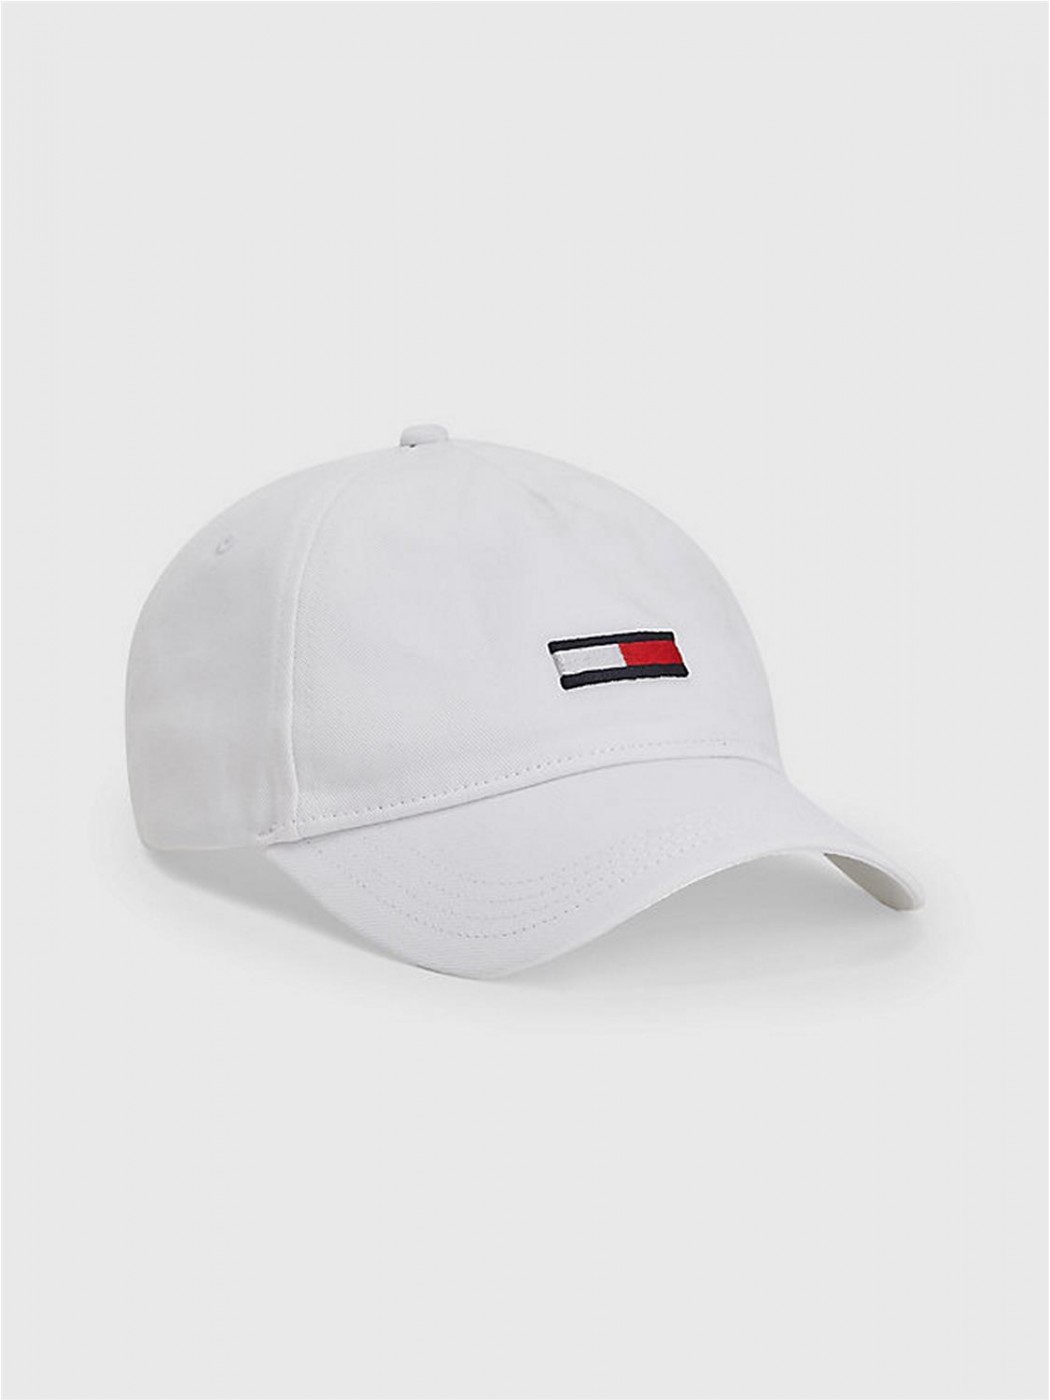 GORRA TOMMY JEANS HOMBRE...